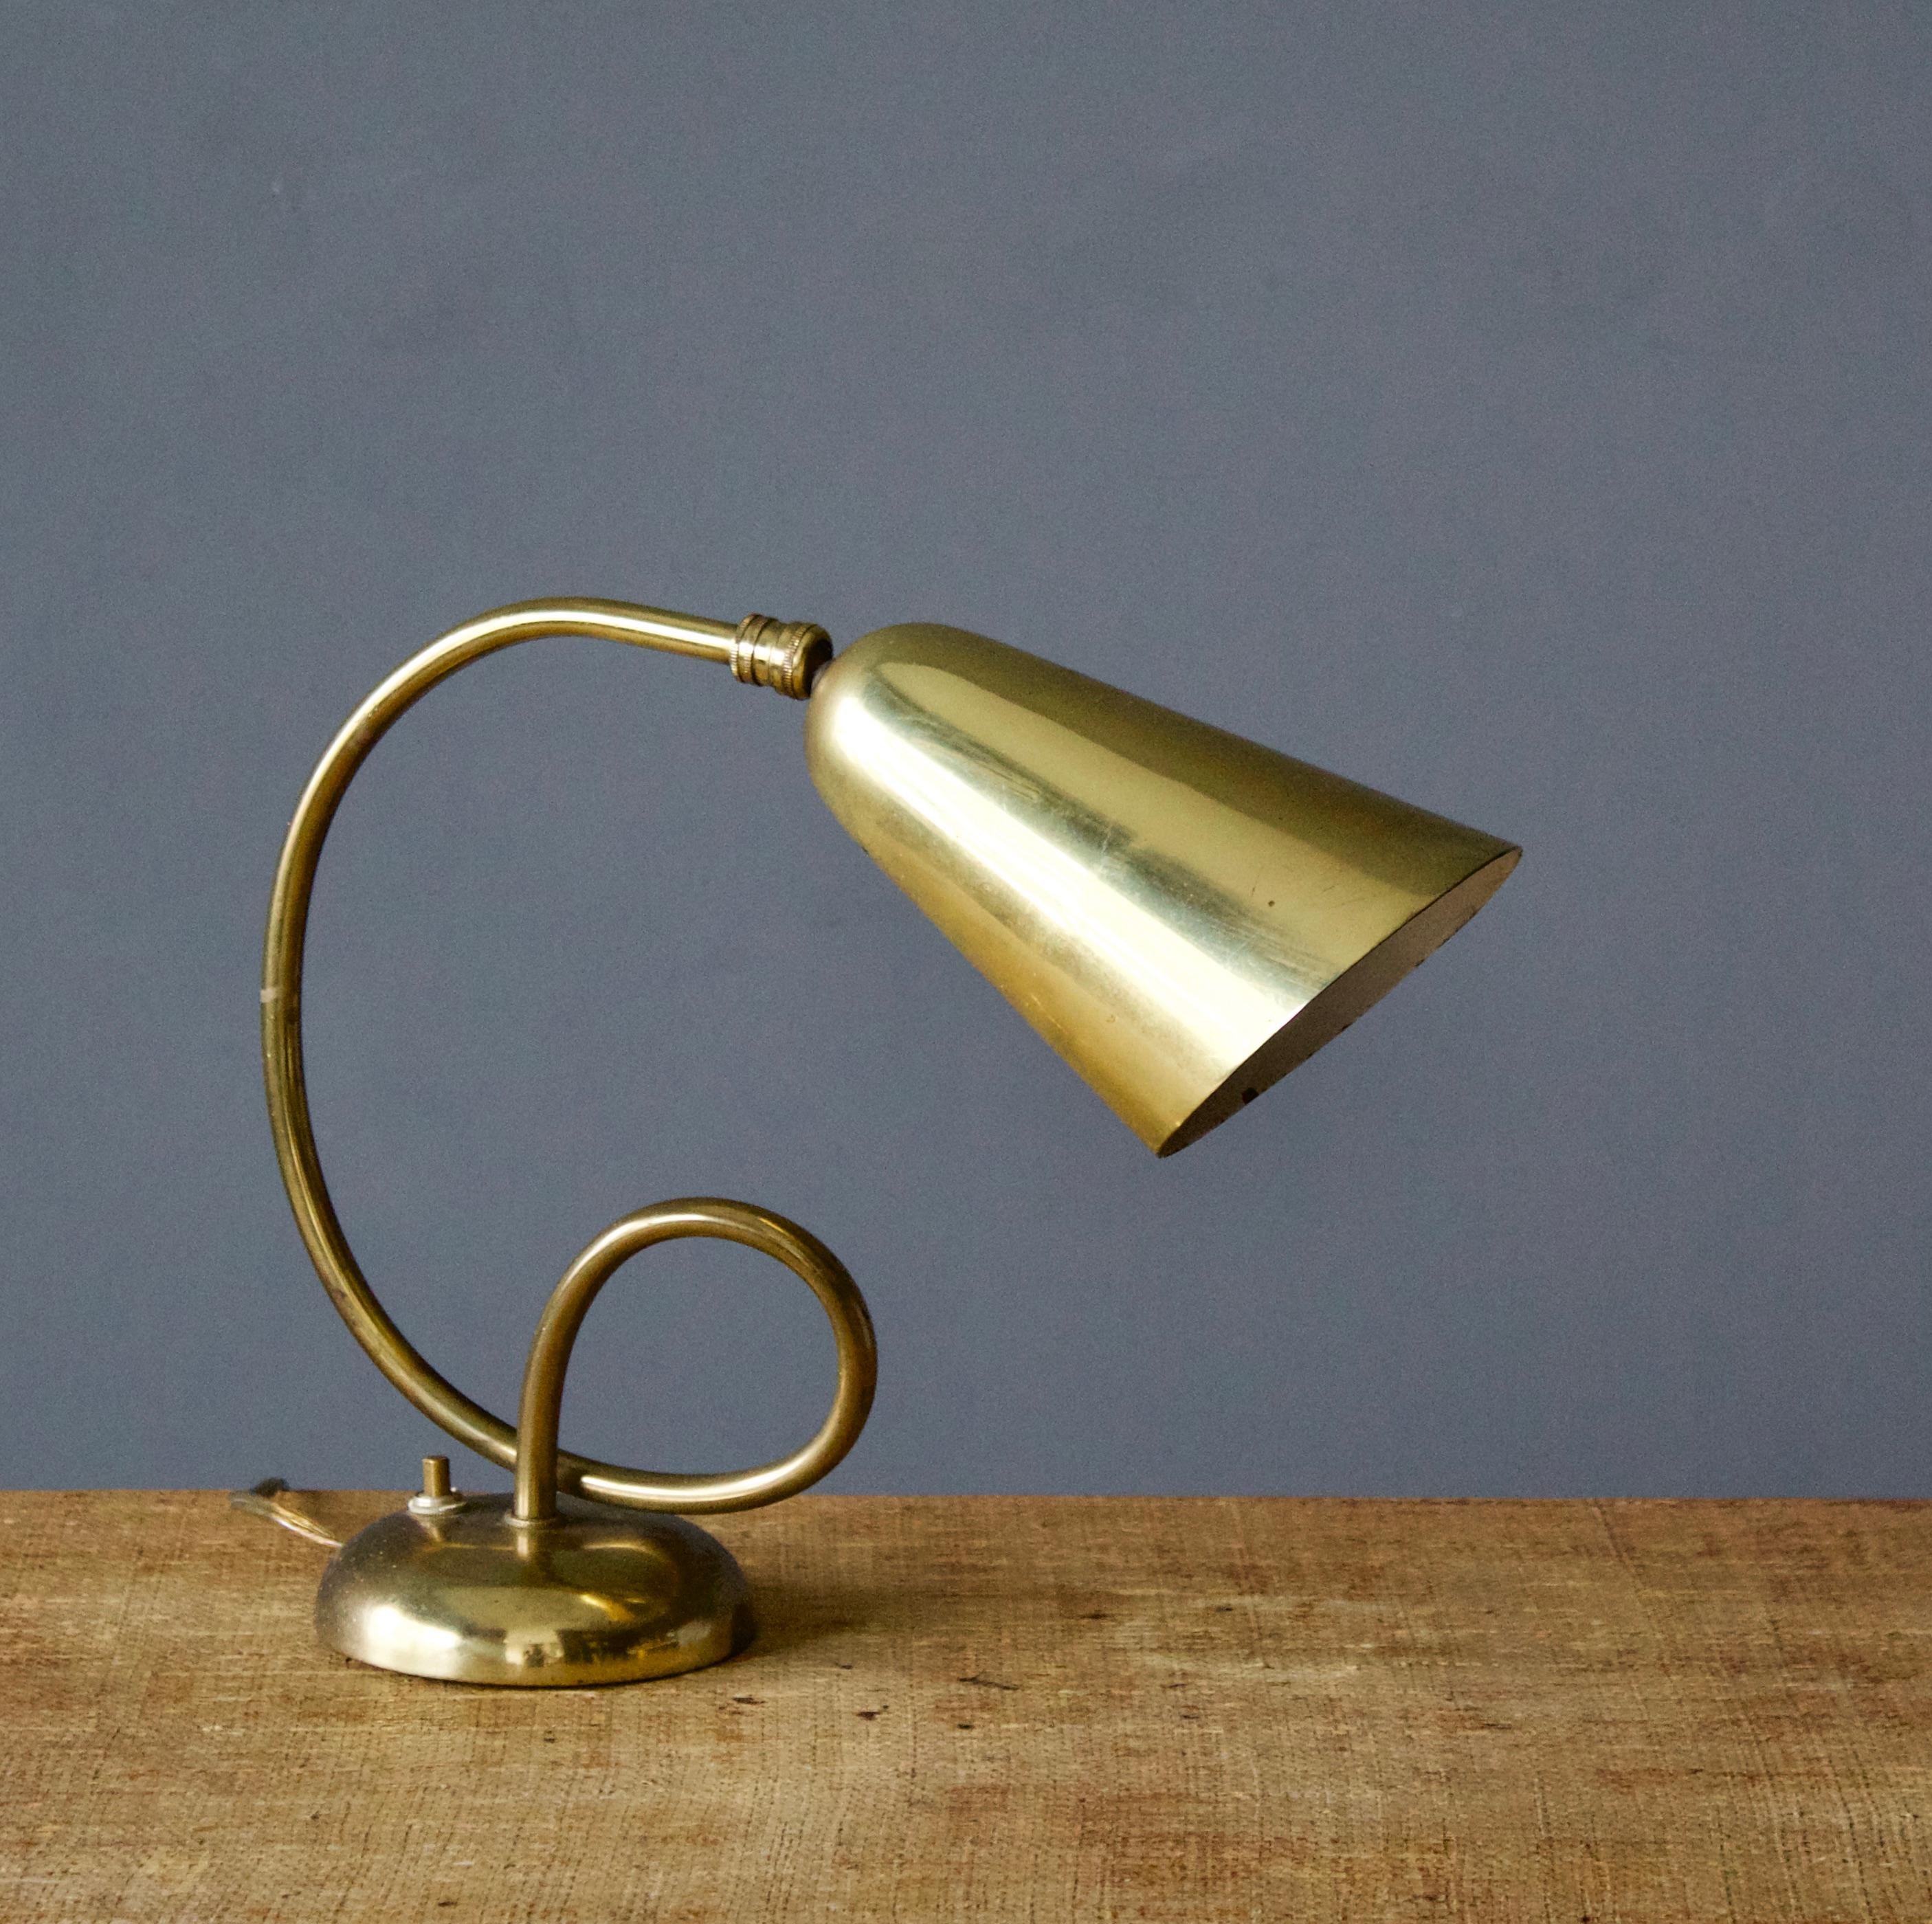 An organic table lamp / desk light. Designed and produced in United States, 1950s.